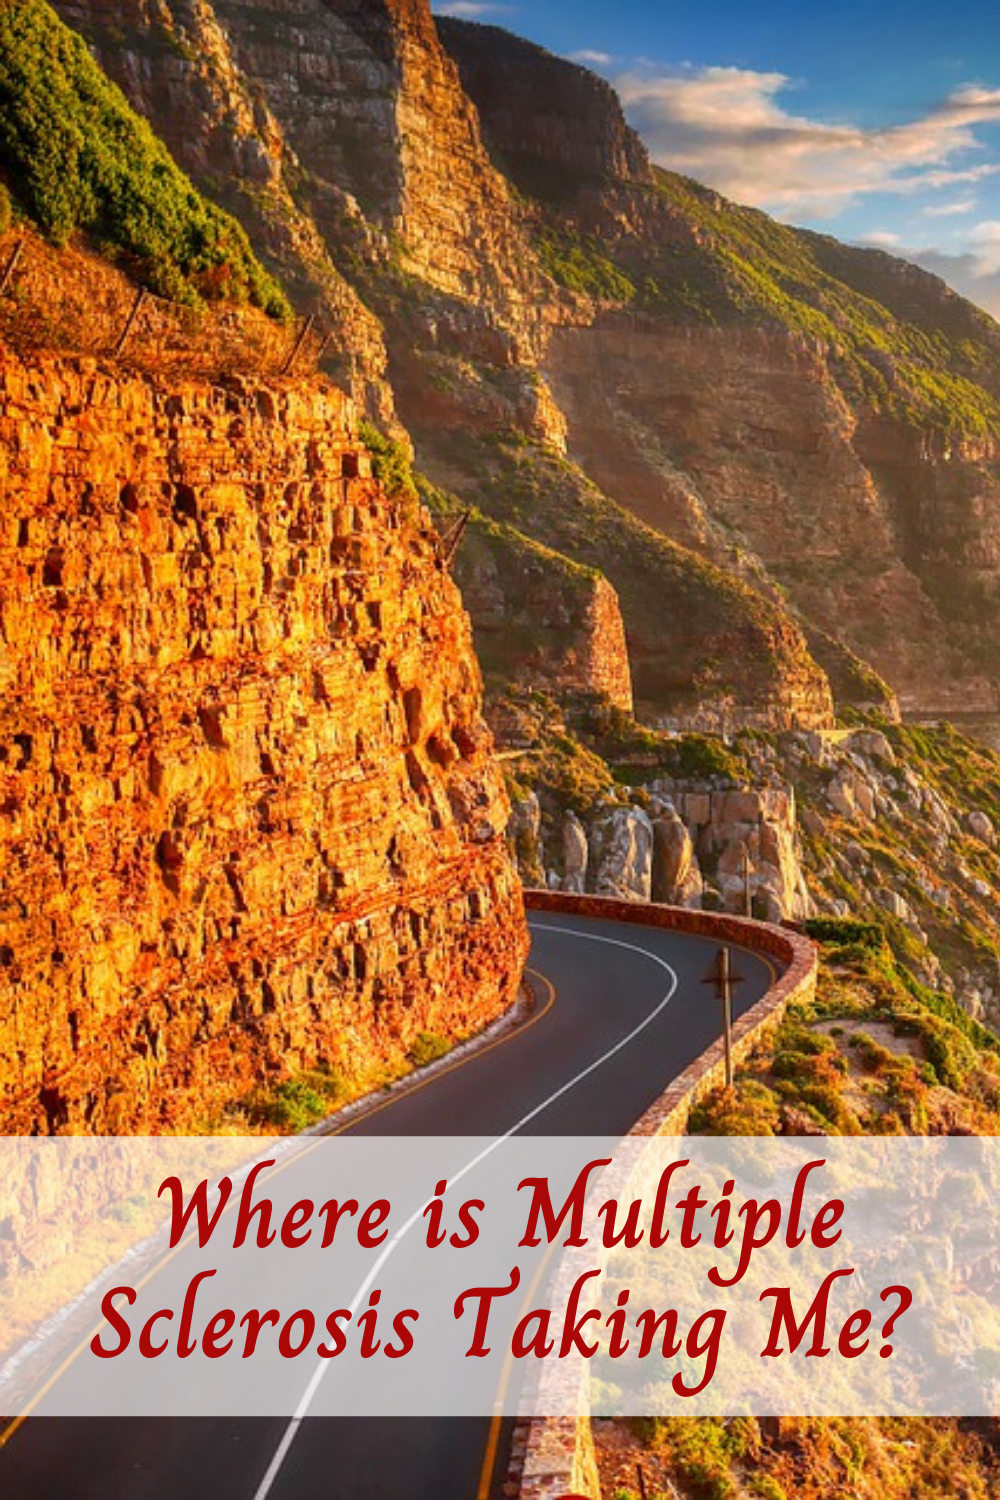 My MS Journey: Where is Multiple Sclerosis Taking Me?